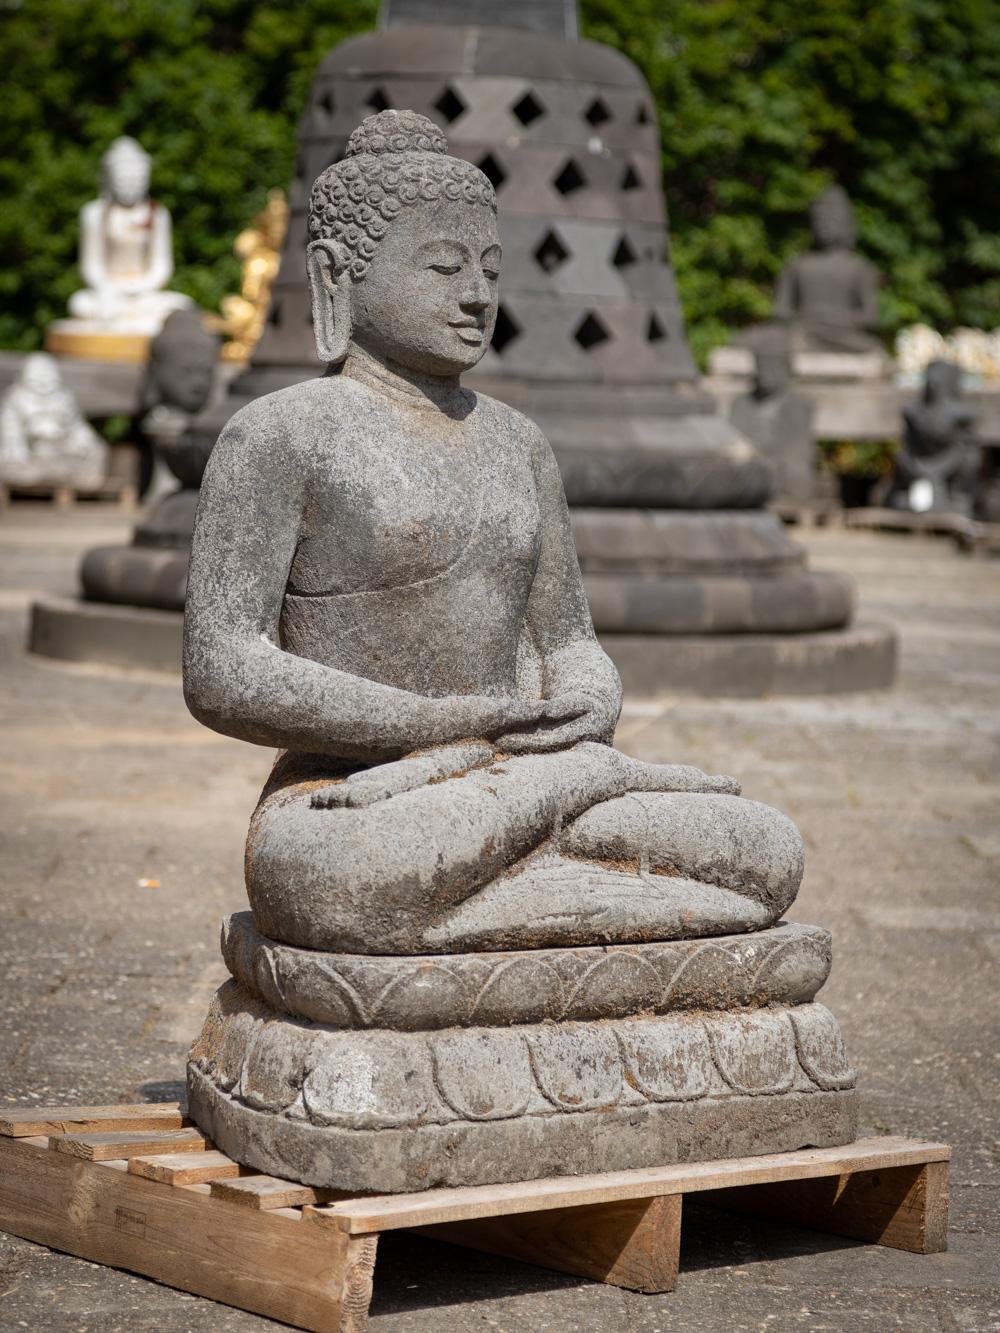 Lava Middle 20th century oll lavastone Buddha statue in Dhyana Mudra from Indonesia